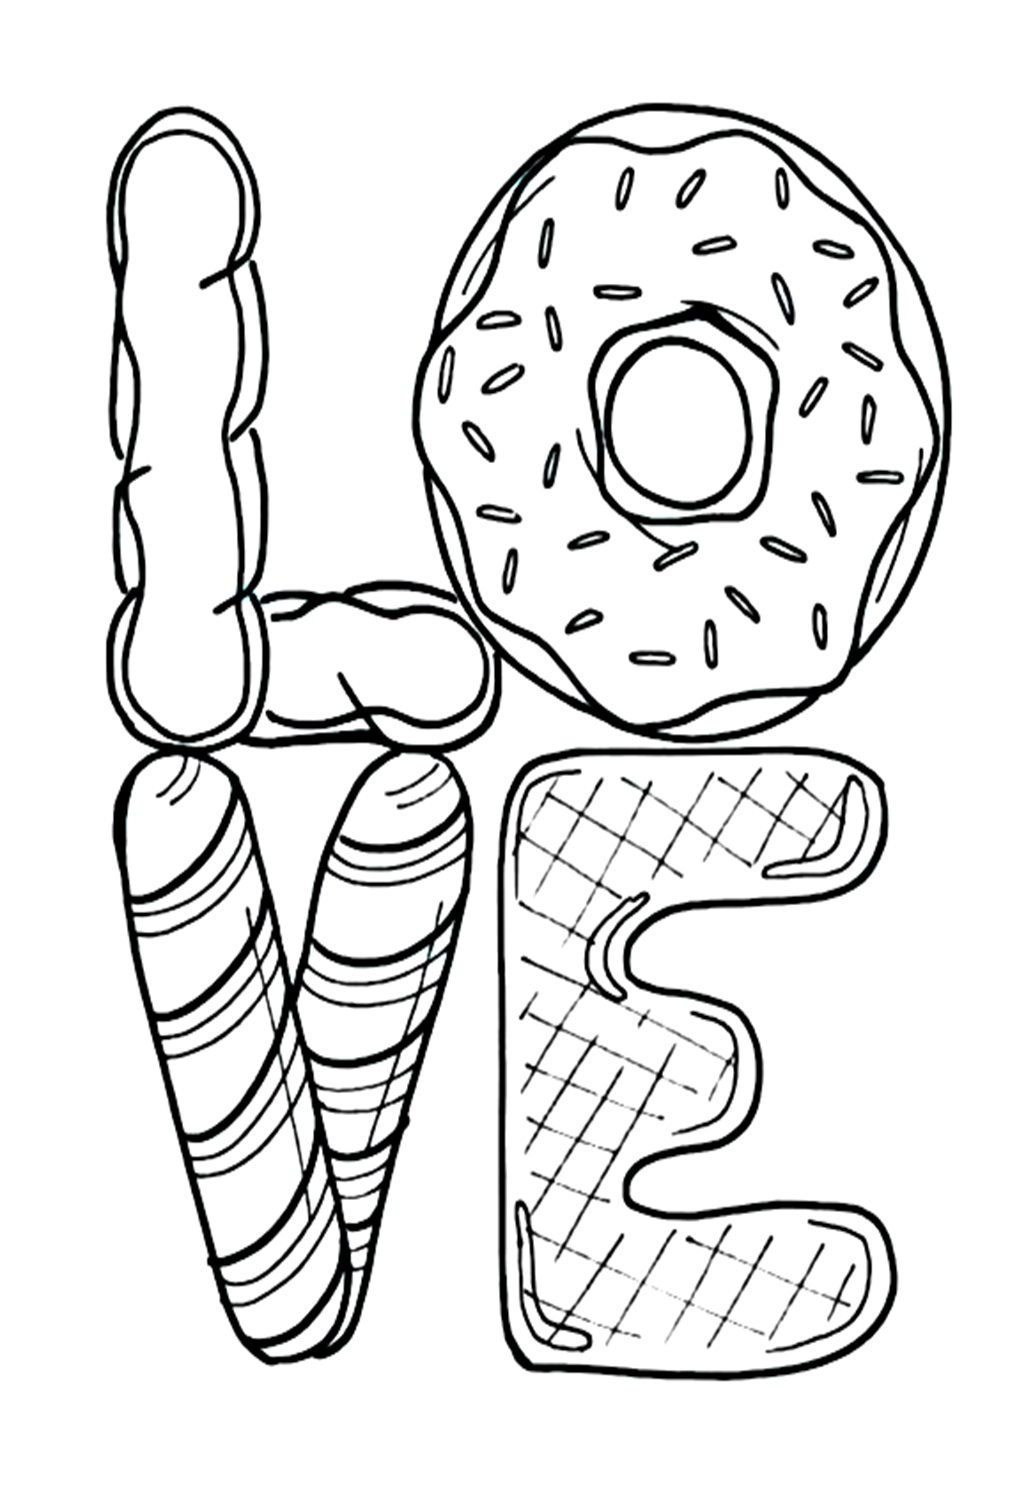 Donut para colorir from Donut